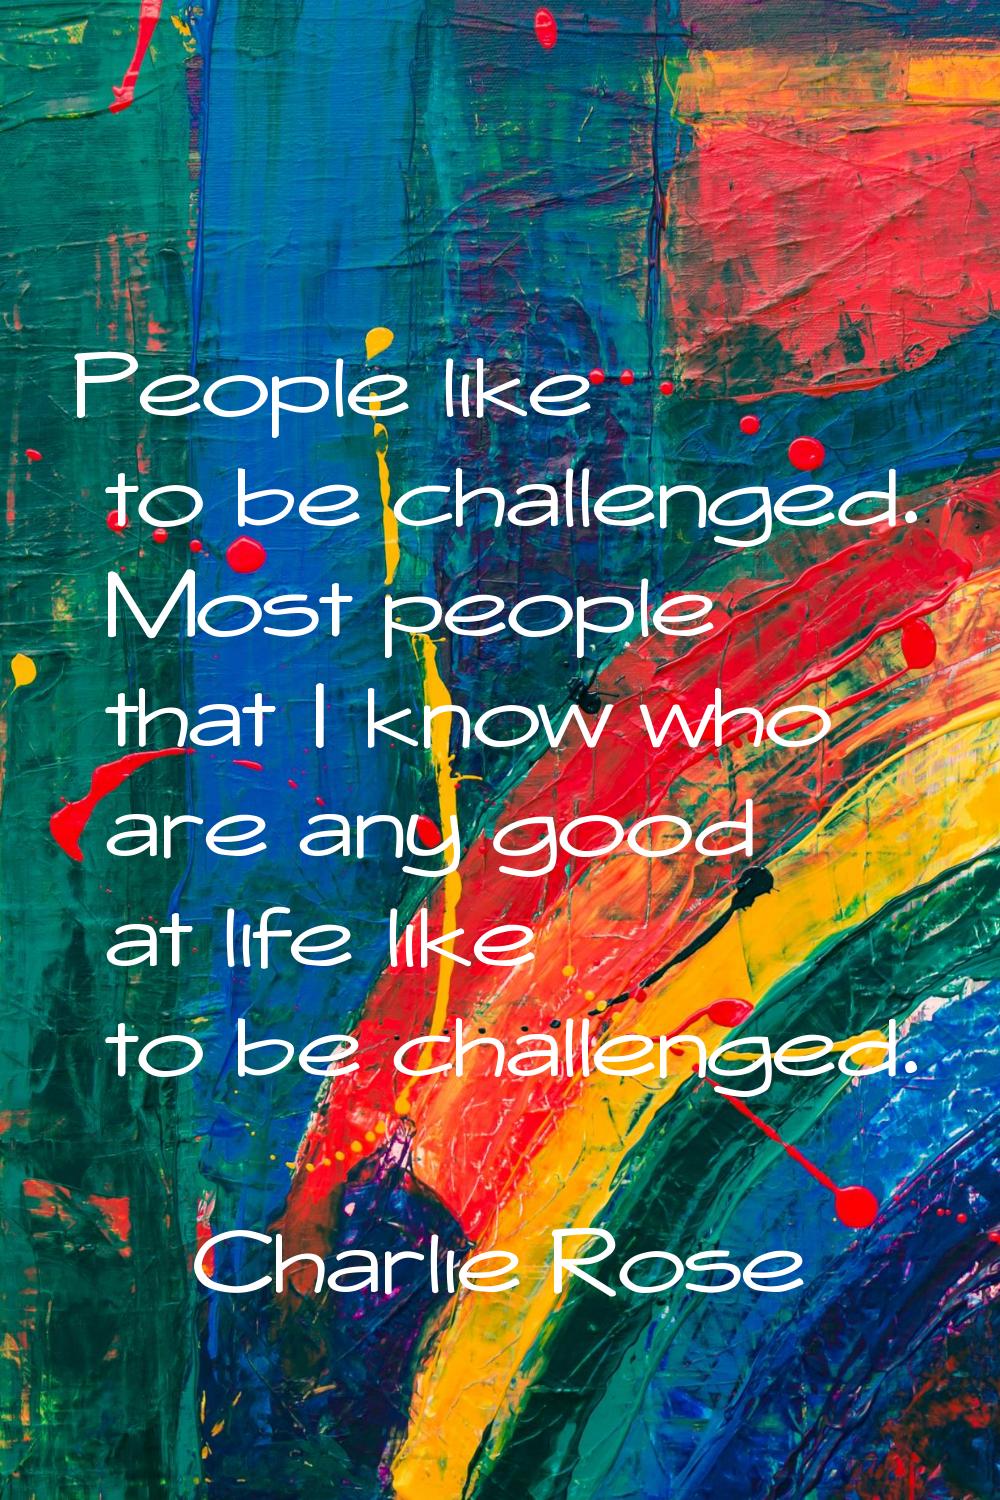 People like to be challenged. Most people that I know who are any good at life like to be challenge